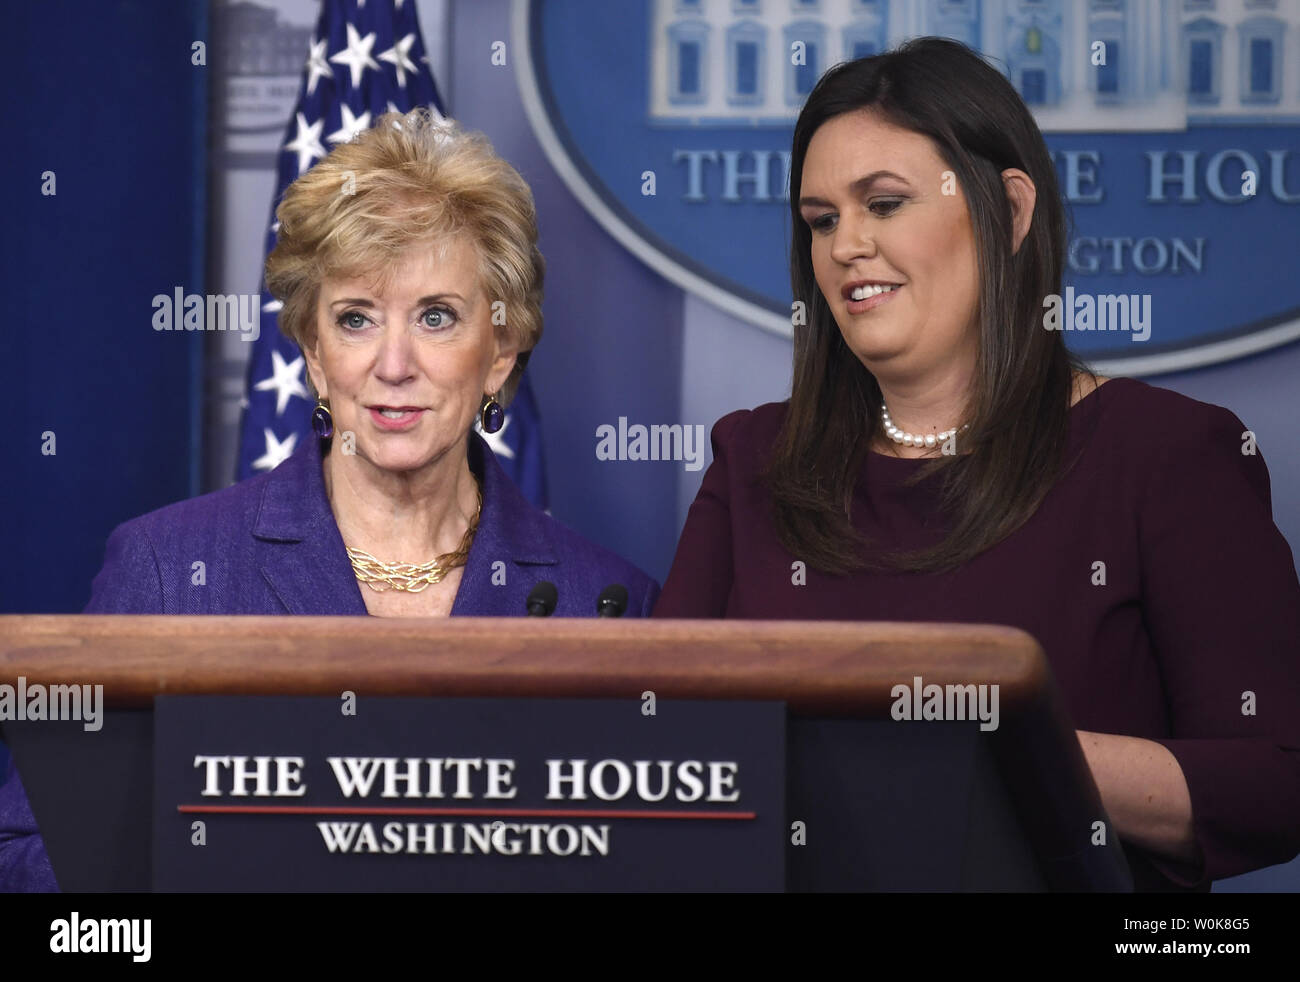 Small Business Administration Administrator Linda Mcmahon L Is Introduced By White House Press Secretary Sarah Huckabee Sanders At The Daily Press Briefing At The White House October 3 18 In Washington Dc